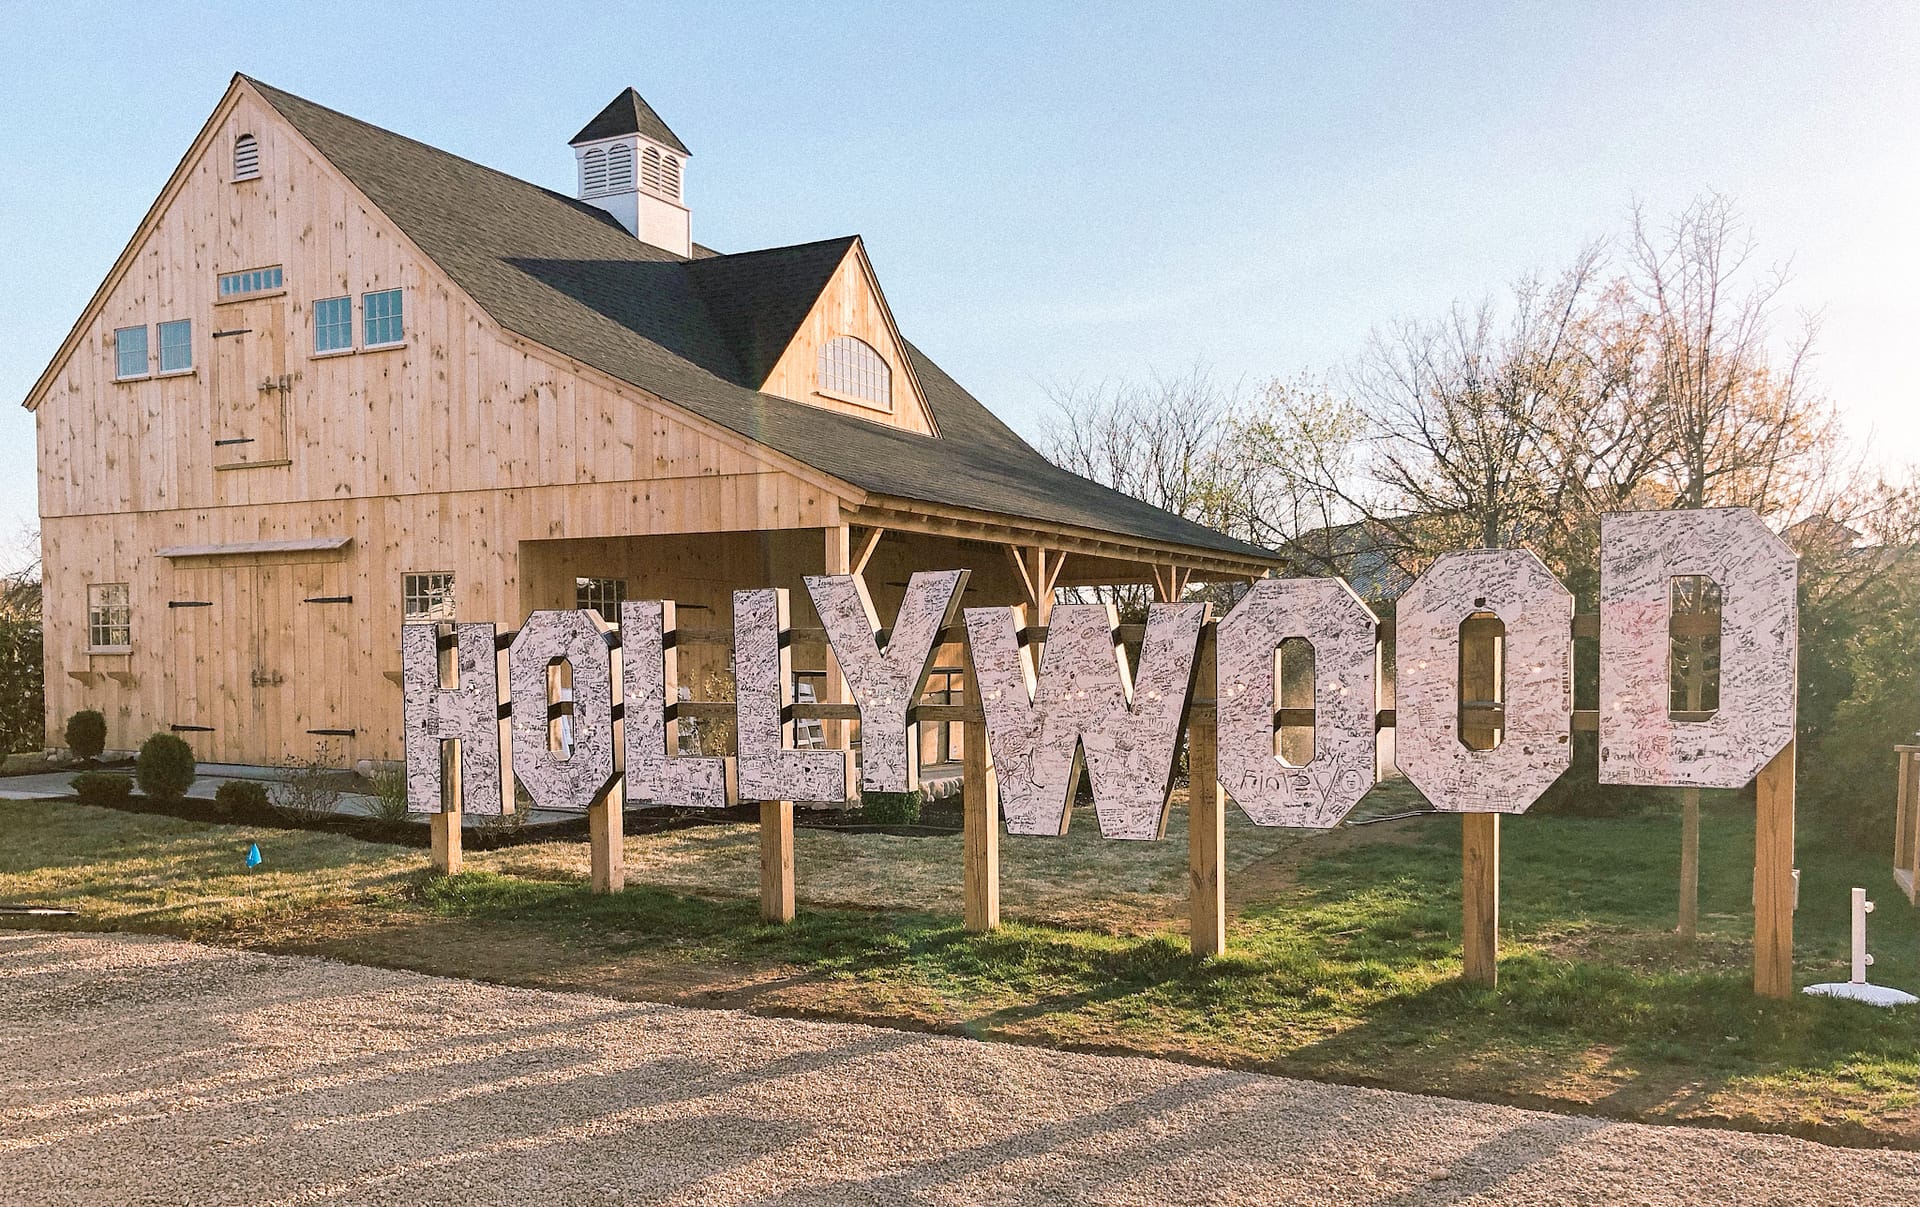 Hollywood video sign with modern wedding chapel in background